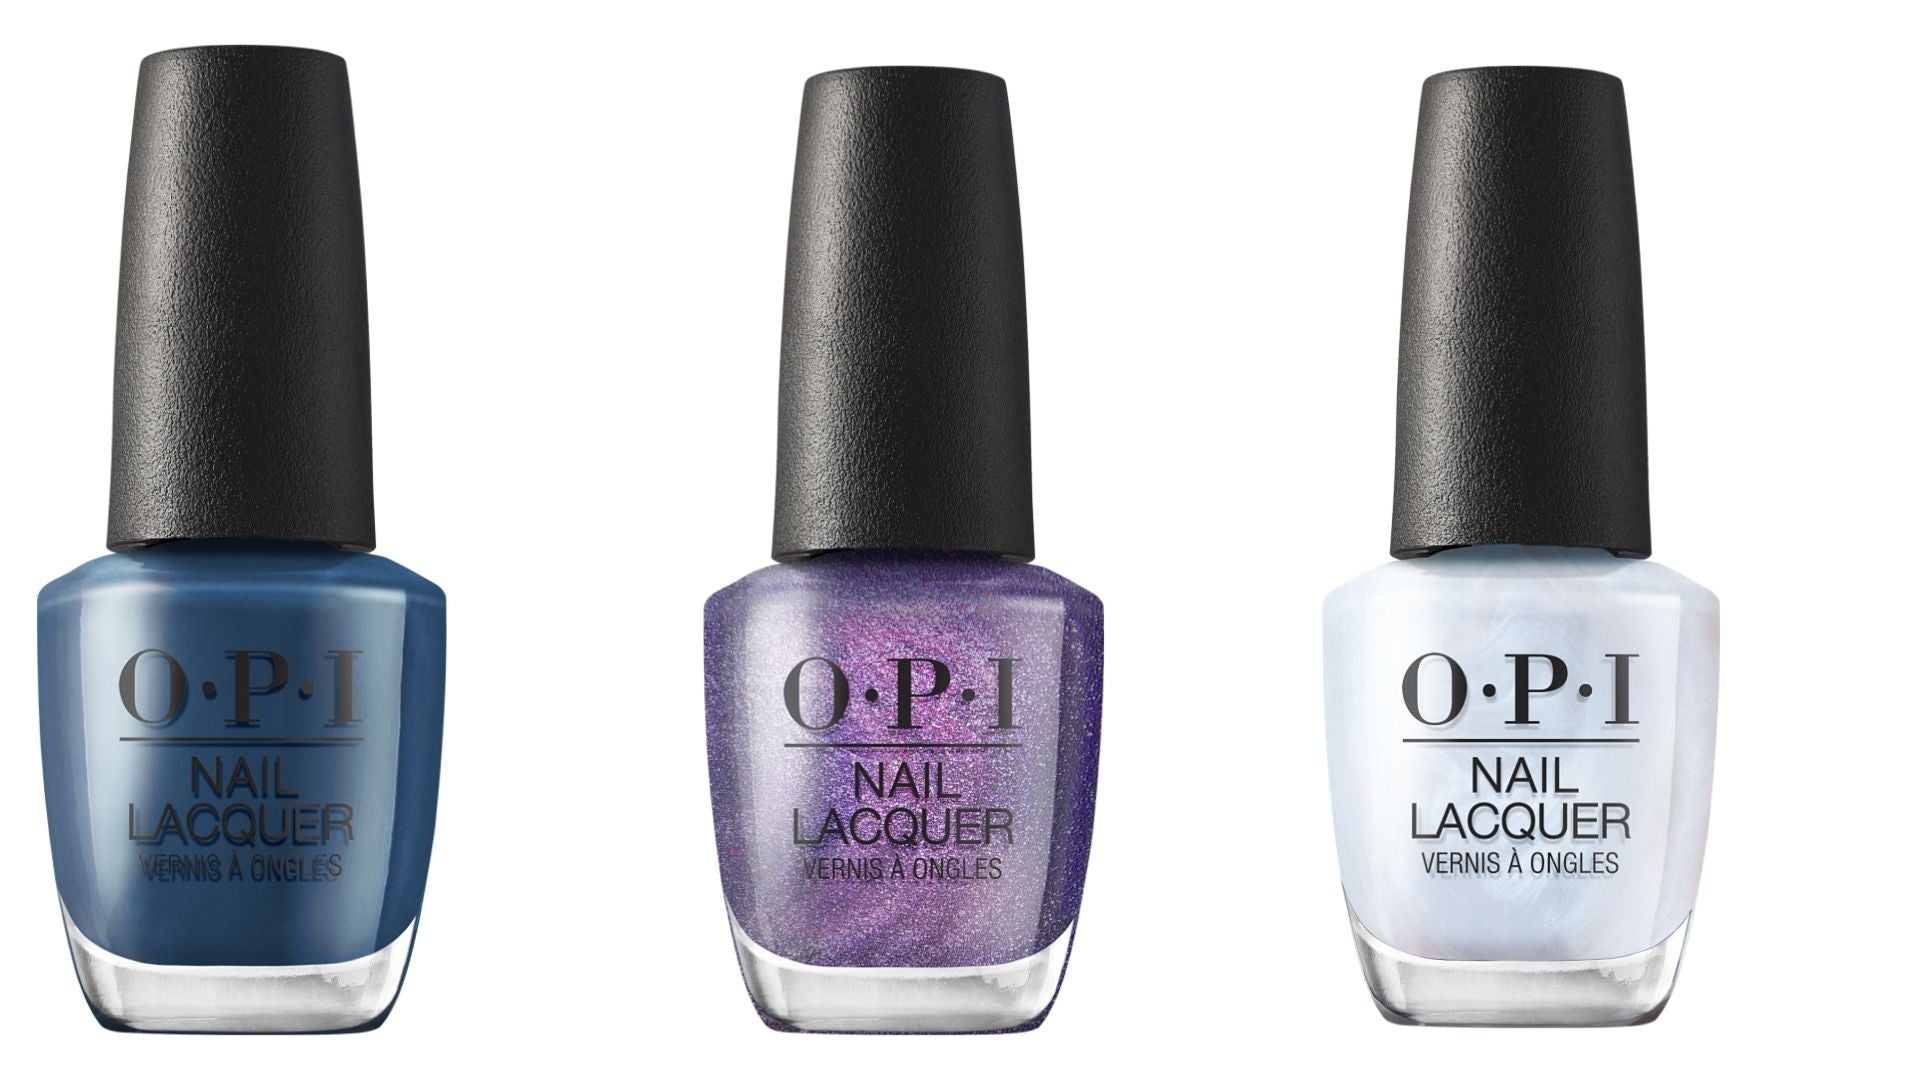 review, photos, makeup, nail polish, trends, 2020, 2021, opi, muse of milan collection, best nail polishes, new nail polishes for fall